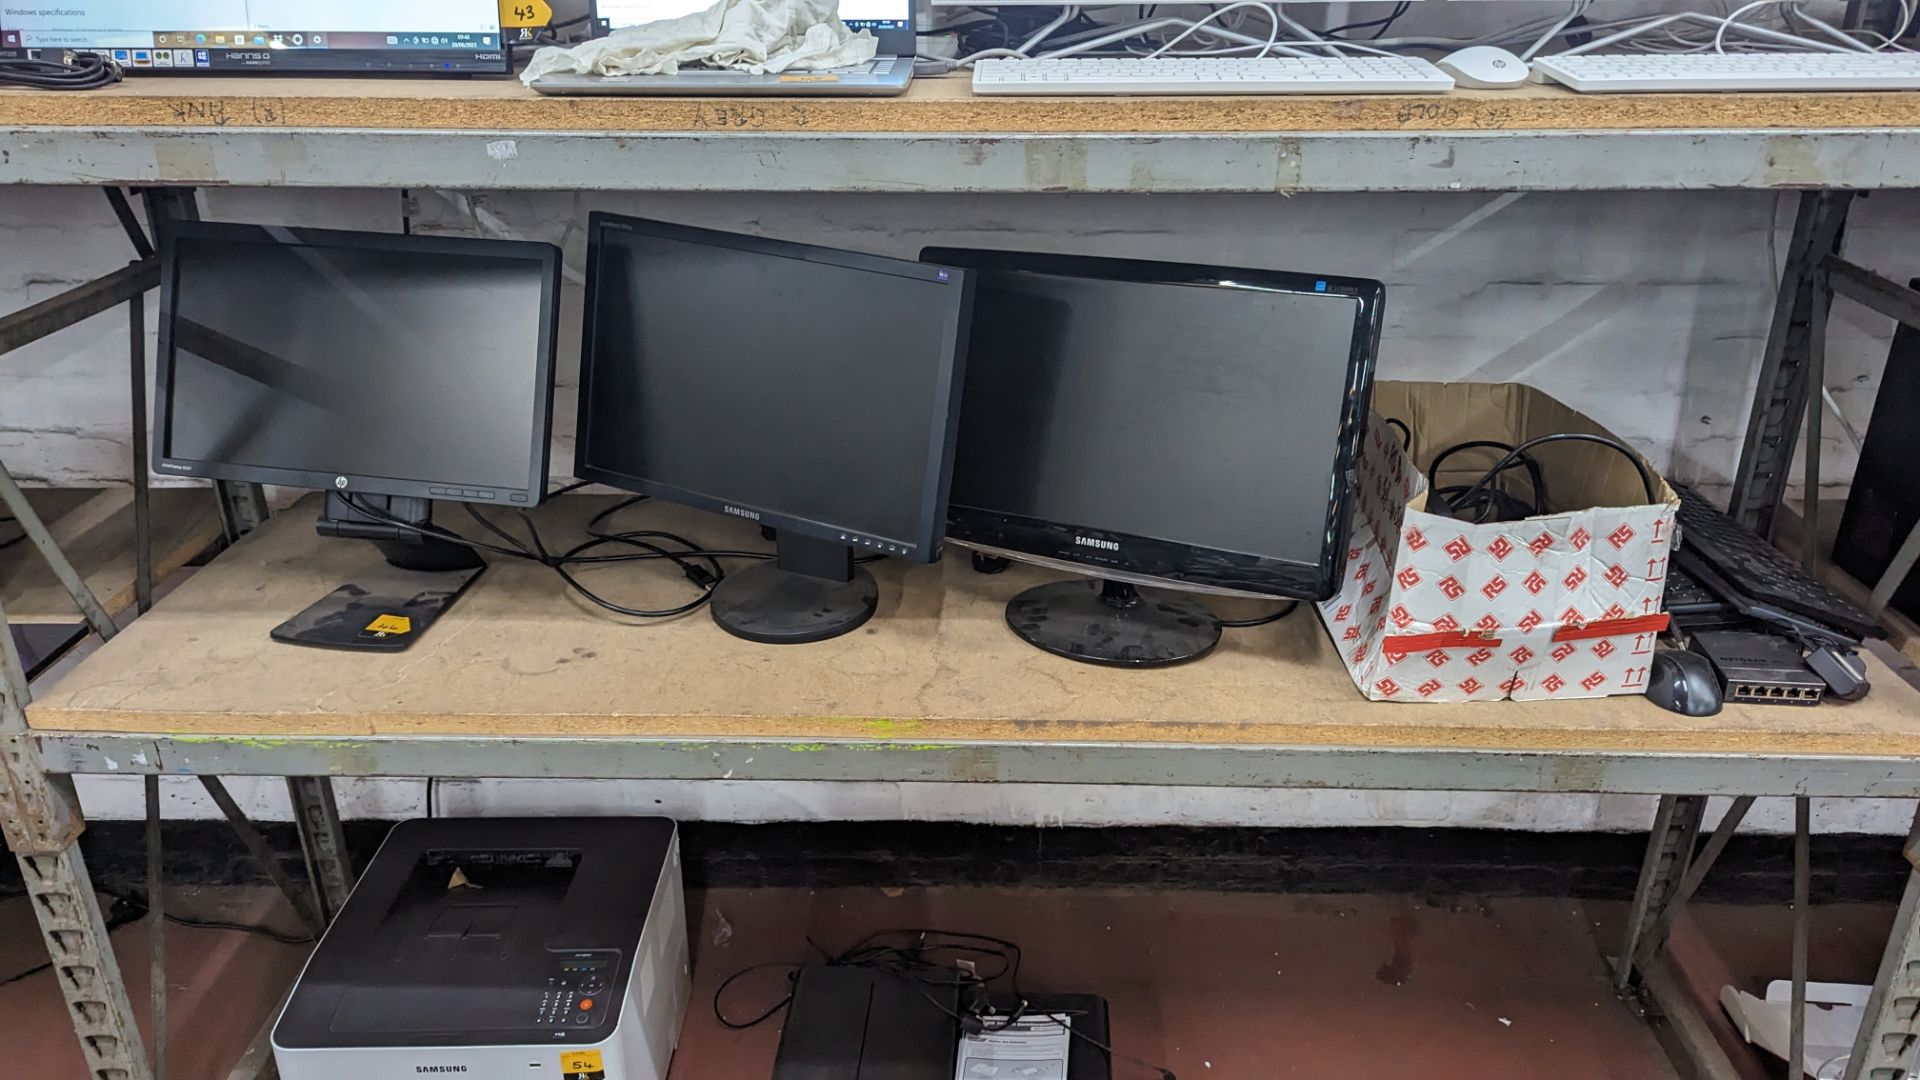 The contents of a shelf of assorted IT equipment including monitors, cables, keyboards, headphones &